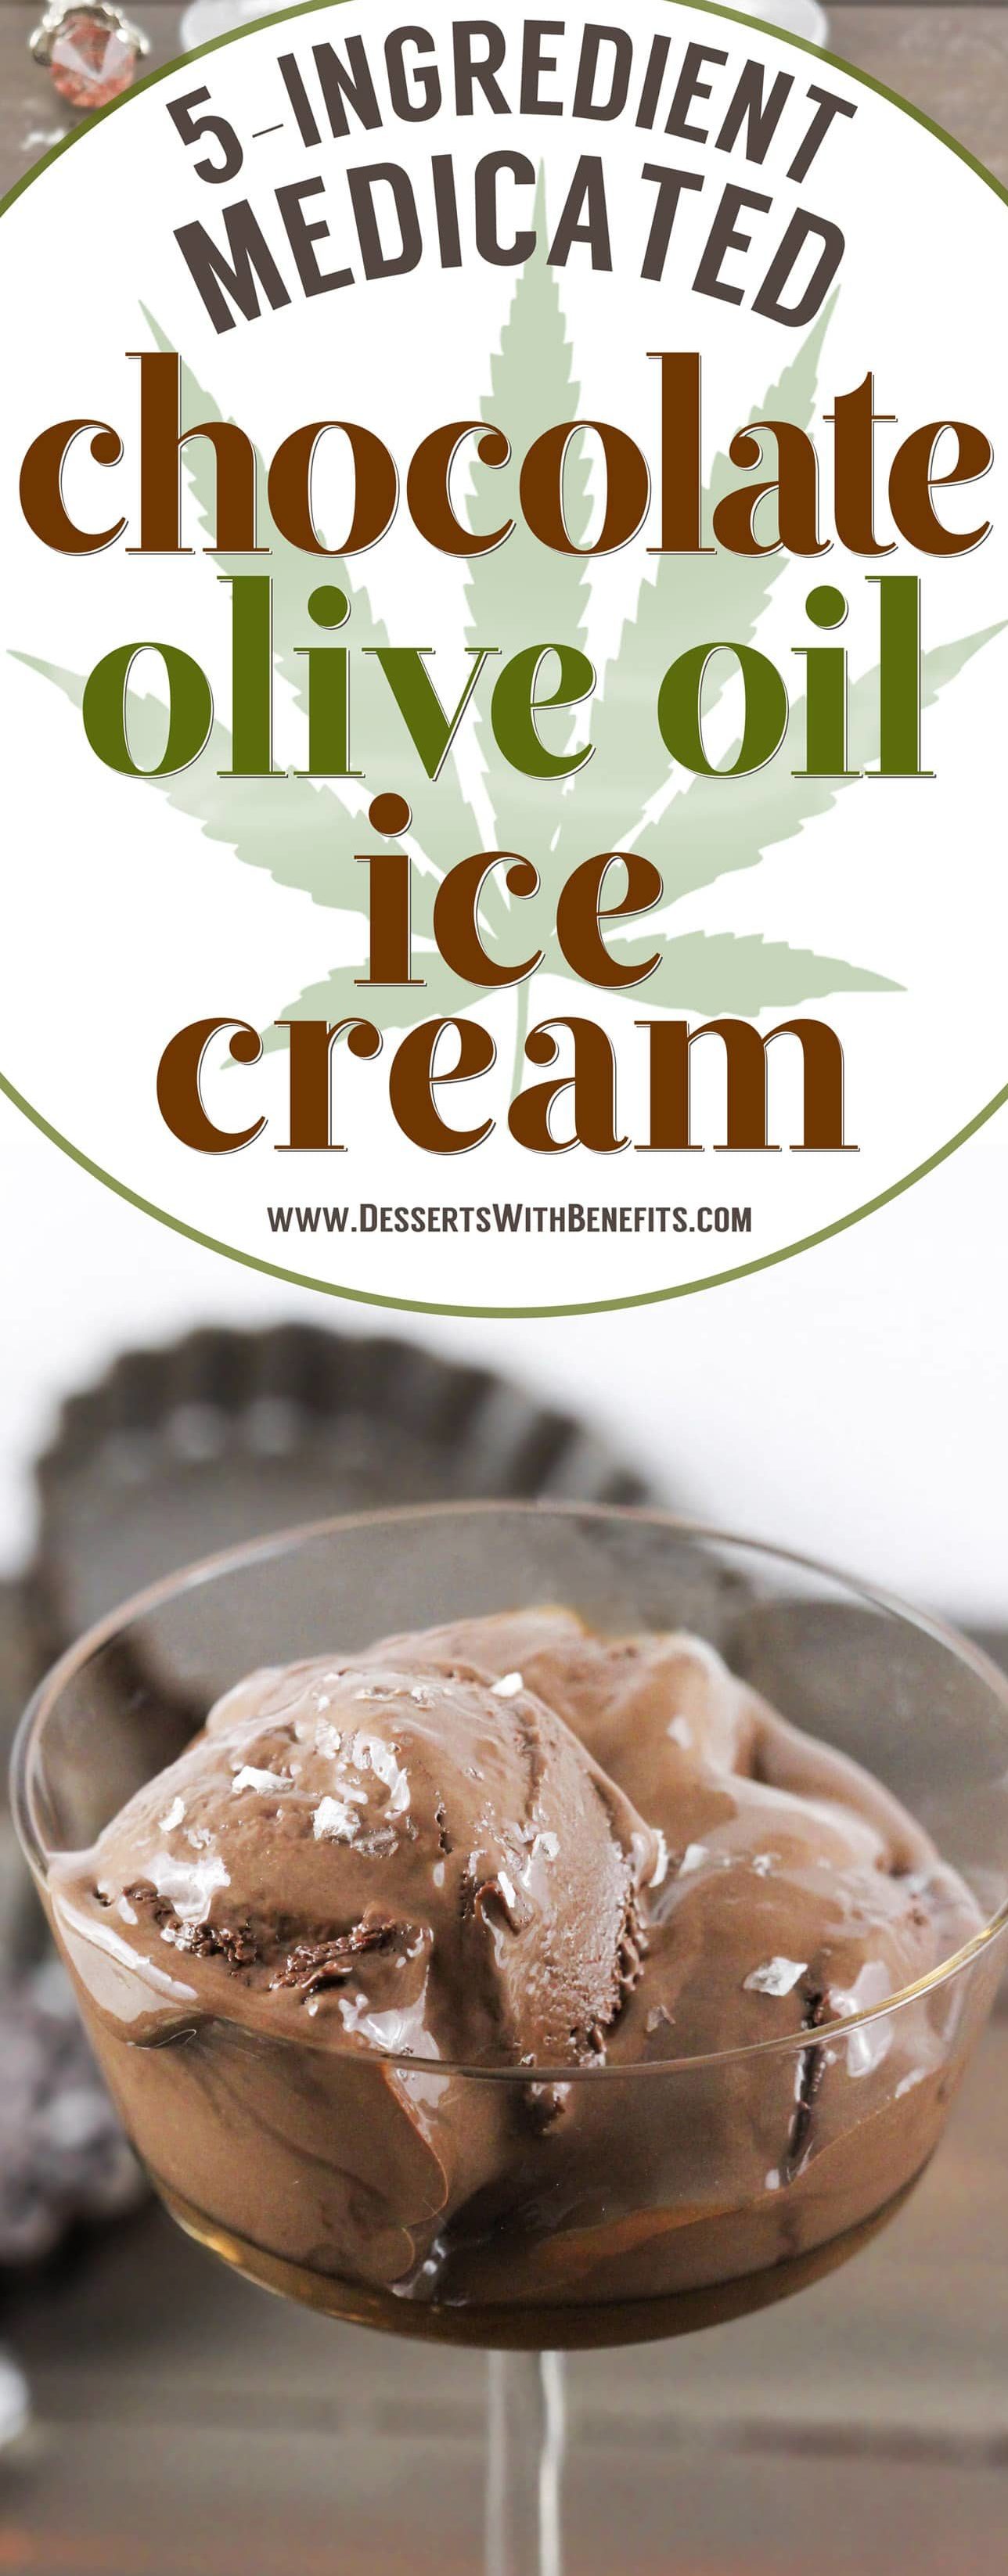 This 5-ingredient Chocolate Olive Oil Ice Cream is ultra creamy, incredibly rich, and perfectly sweet, and it's made in a blender too (no ice cream maker required)! Best of all, it's refined sugar free and full of healthy fats, with a punch of protein, and a secret ingredient:  cannabis-infused olive oil! Get into the homemade marijuana edibles game with this Medicated Chocolate Olive Oil Ice Cream. Way better than pot brownies, am I right?